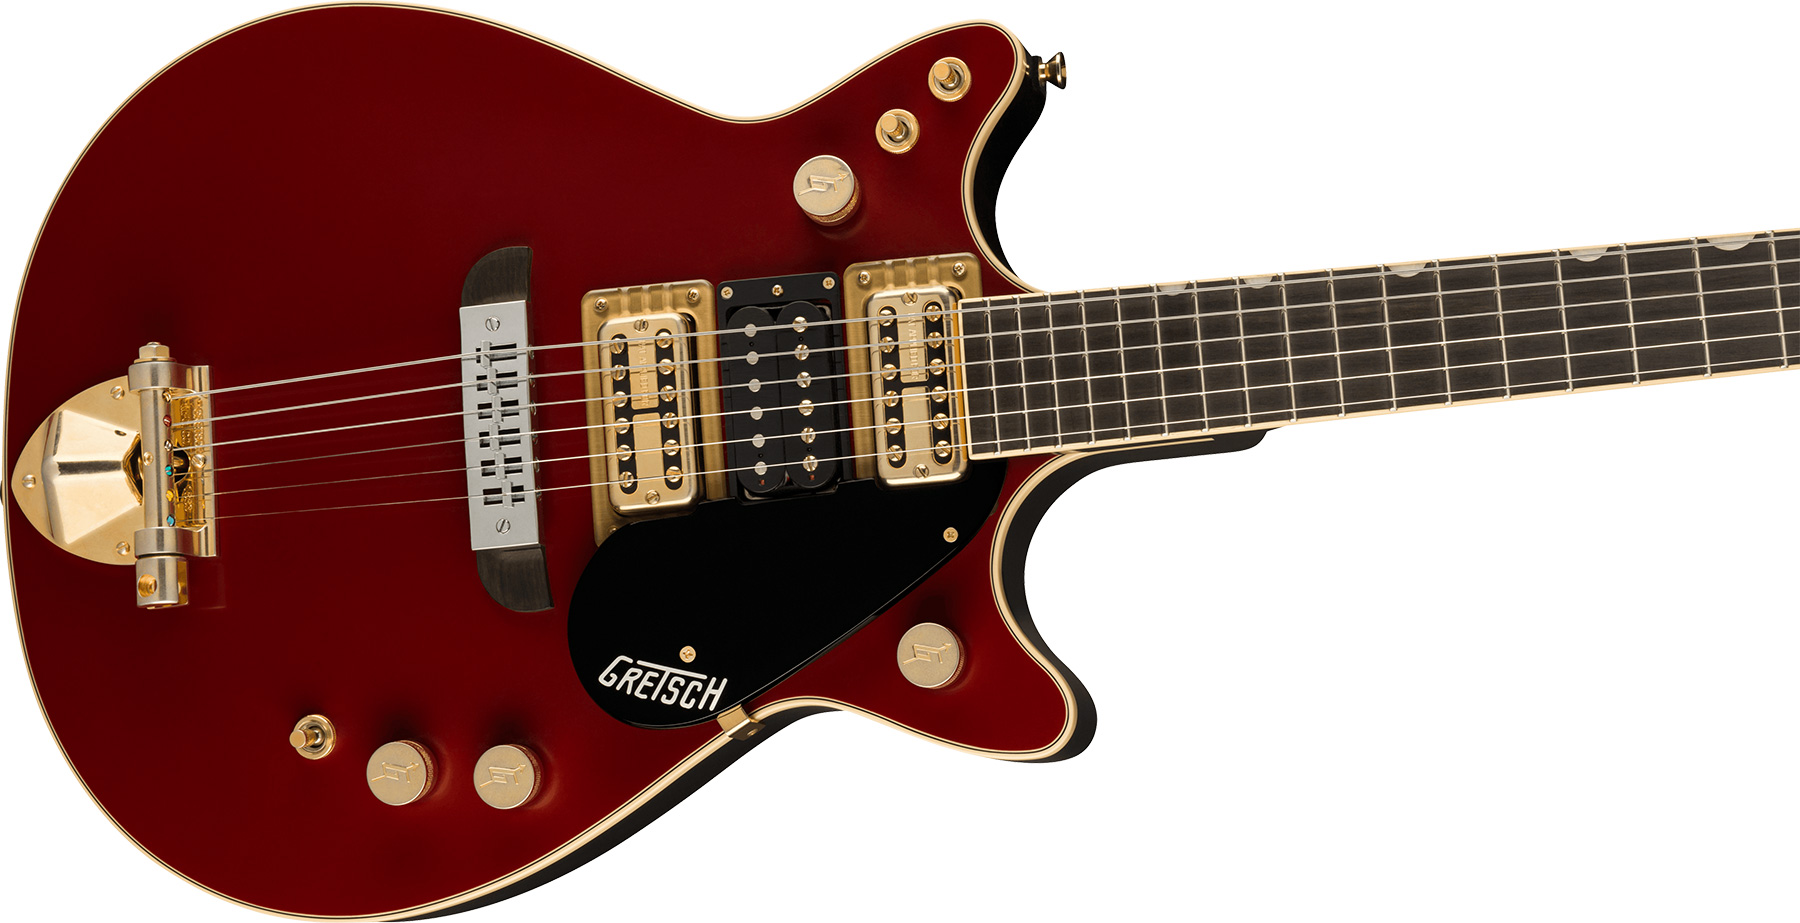 Gretsch Malcolm Young G6131g-my-rb Jet Ltd Signature 3h Ht Eb - Vintage Firebird Red - Double cut electric guitar - Variation 2